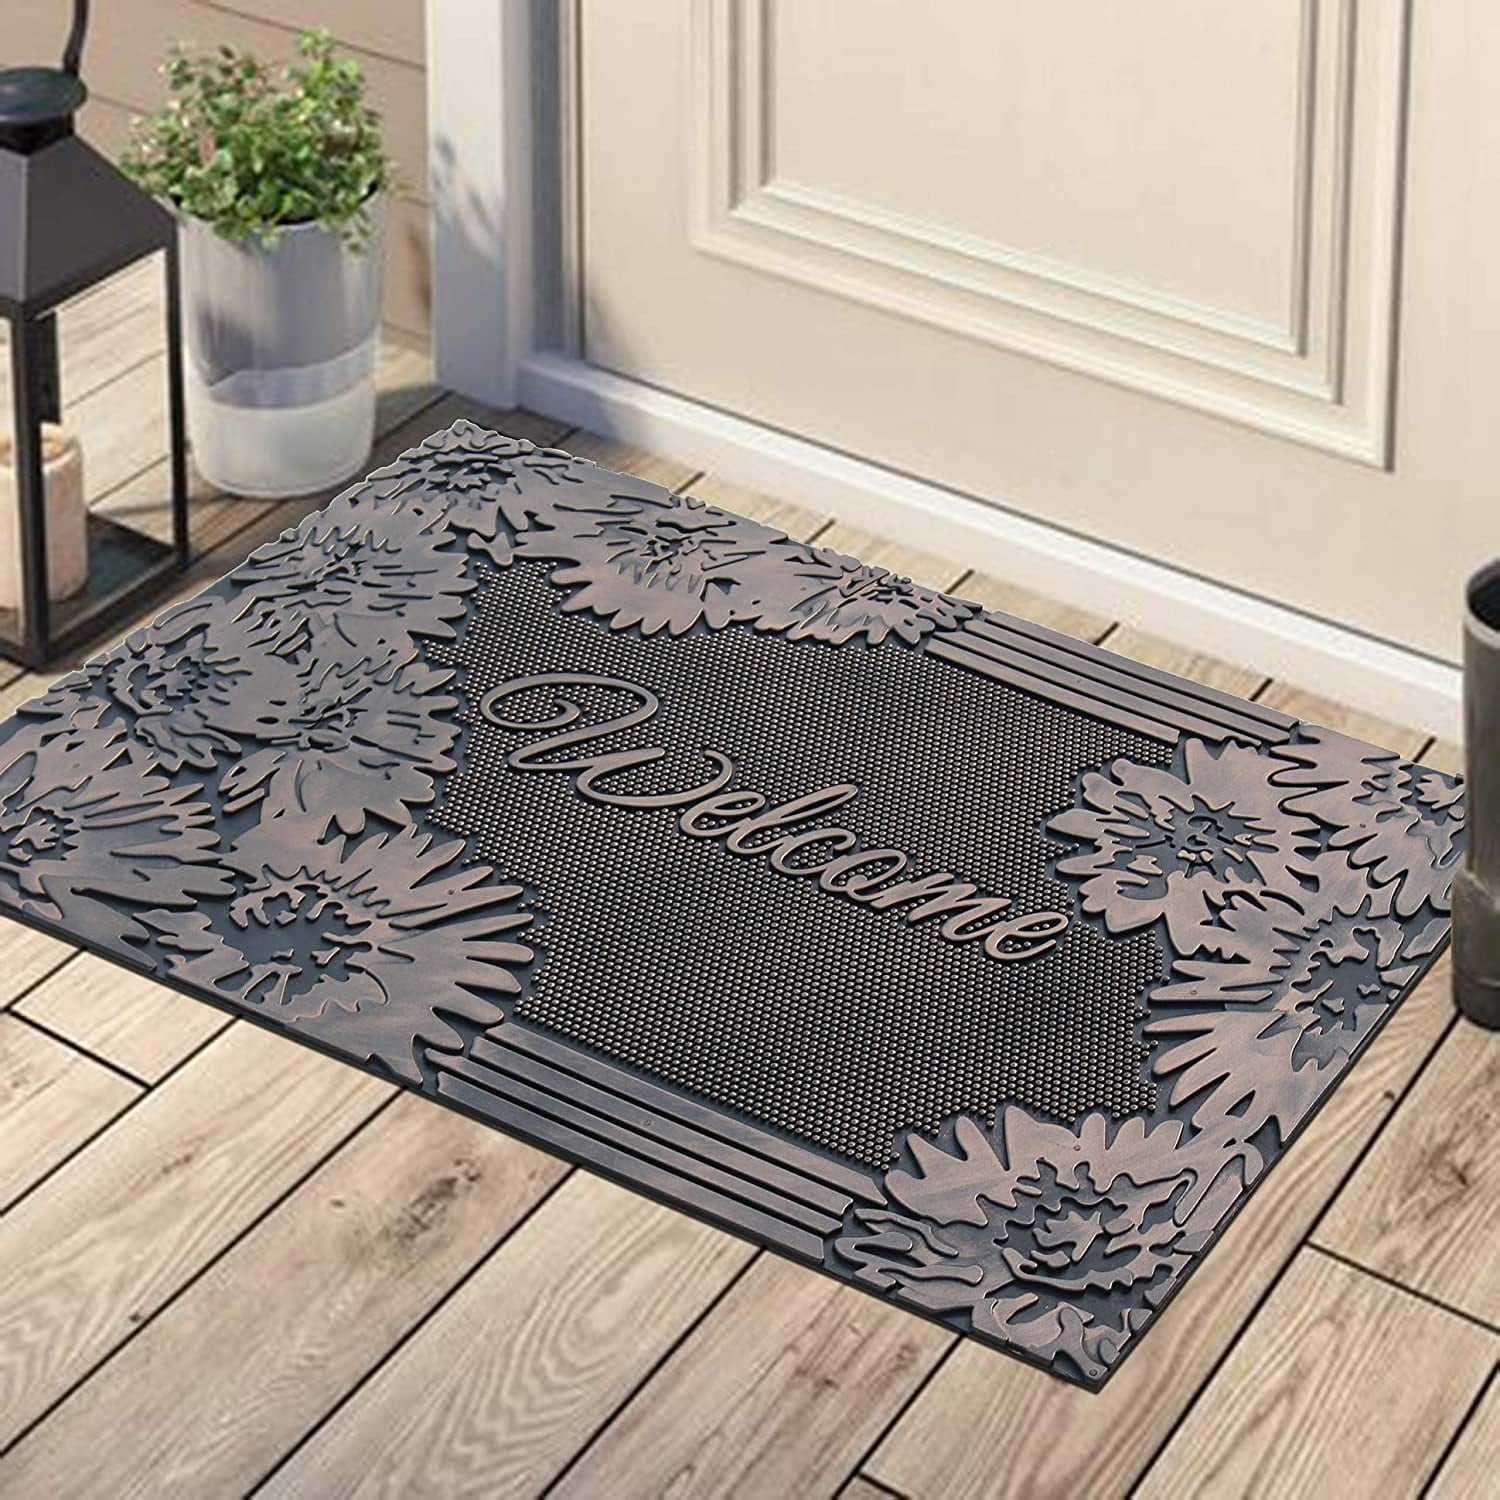 18 x 56 Welcome Border Extra Large Coir Double Doormat